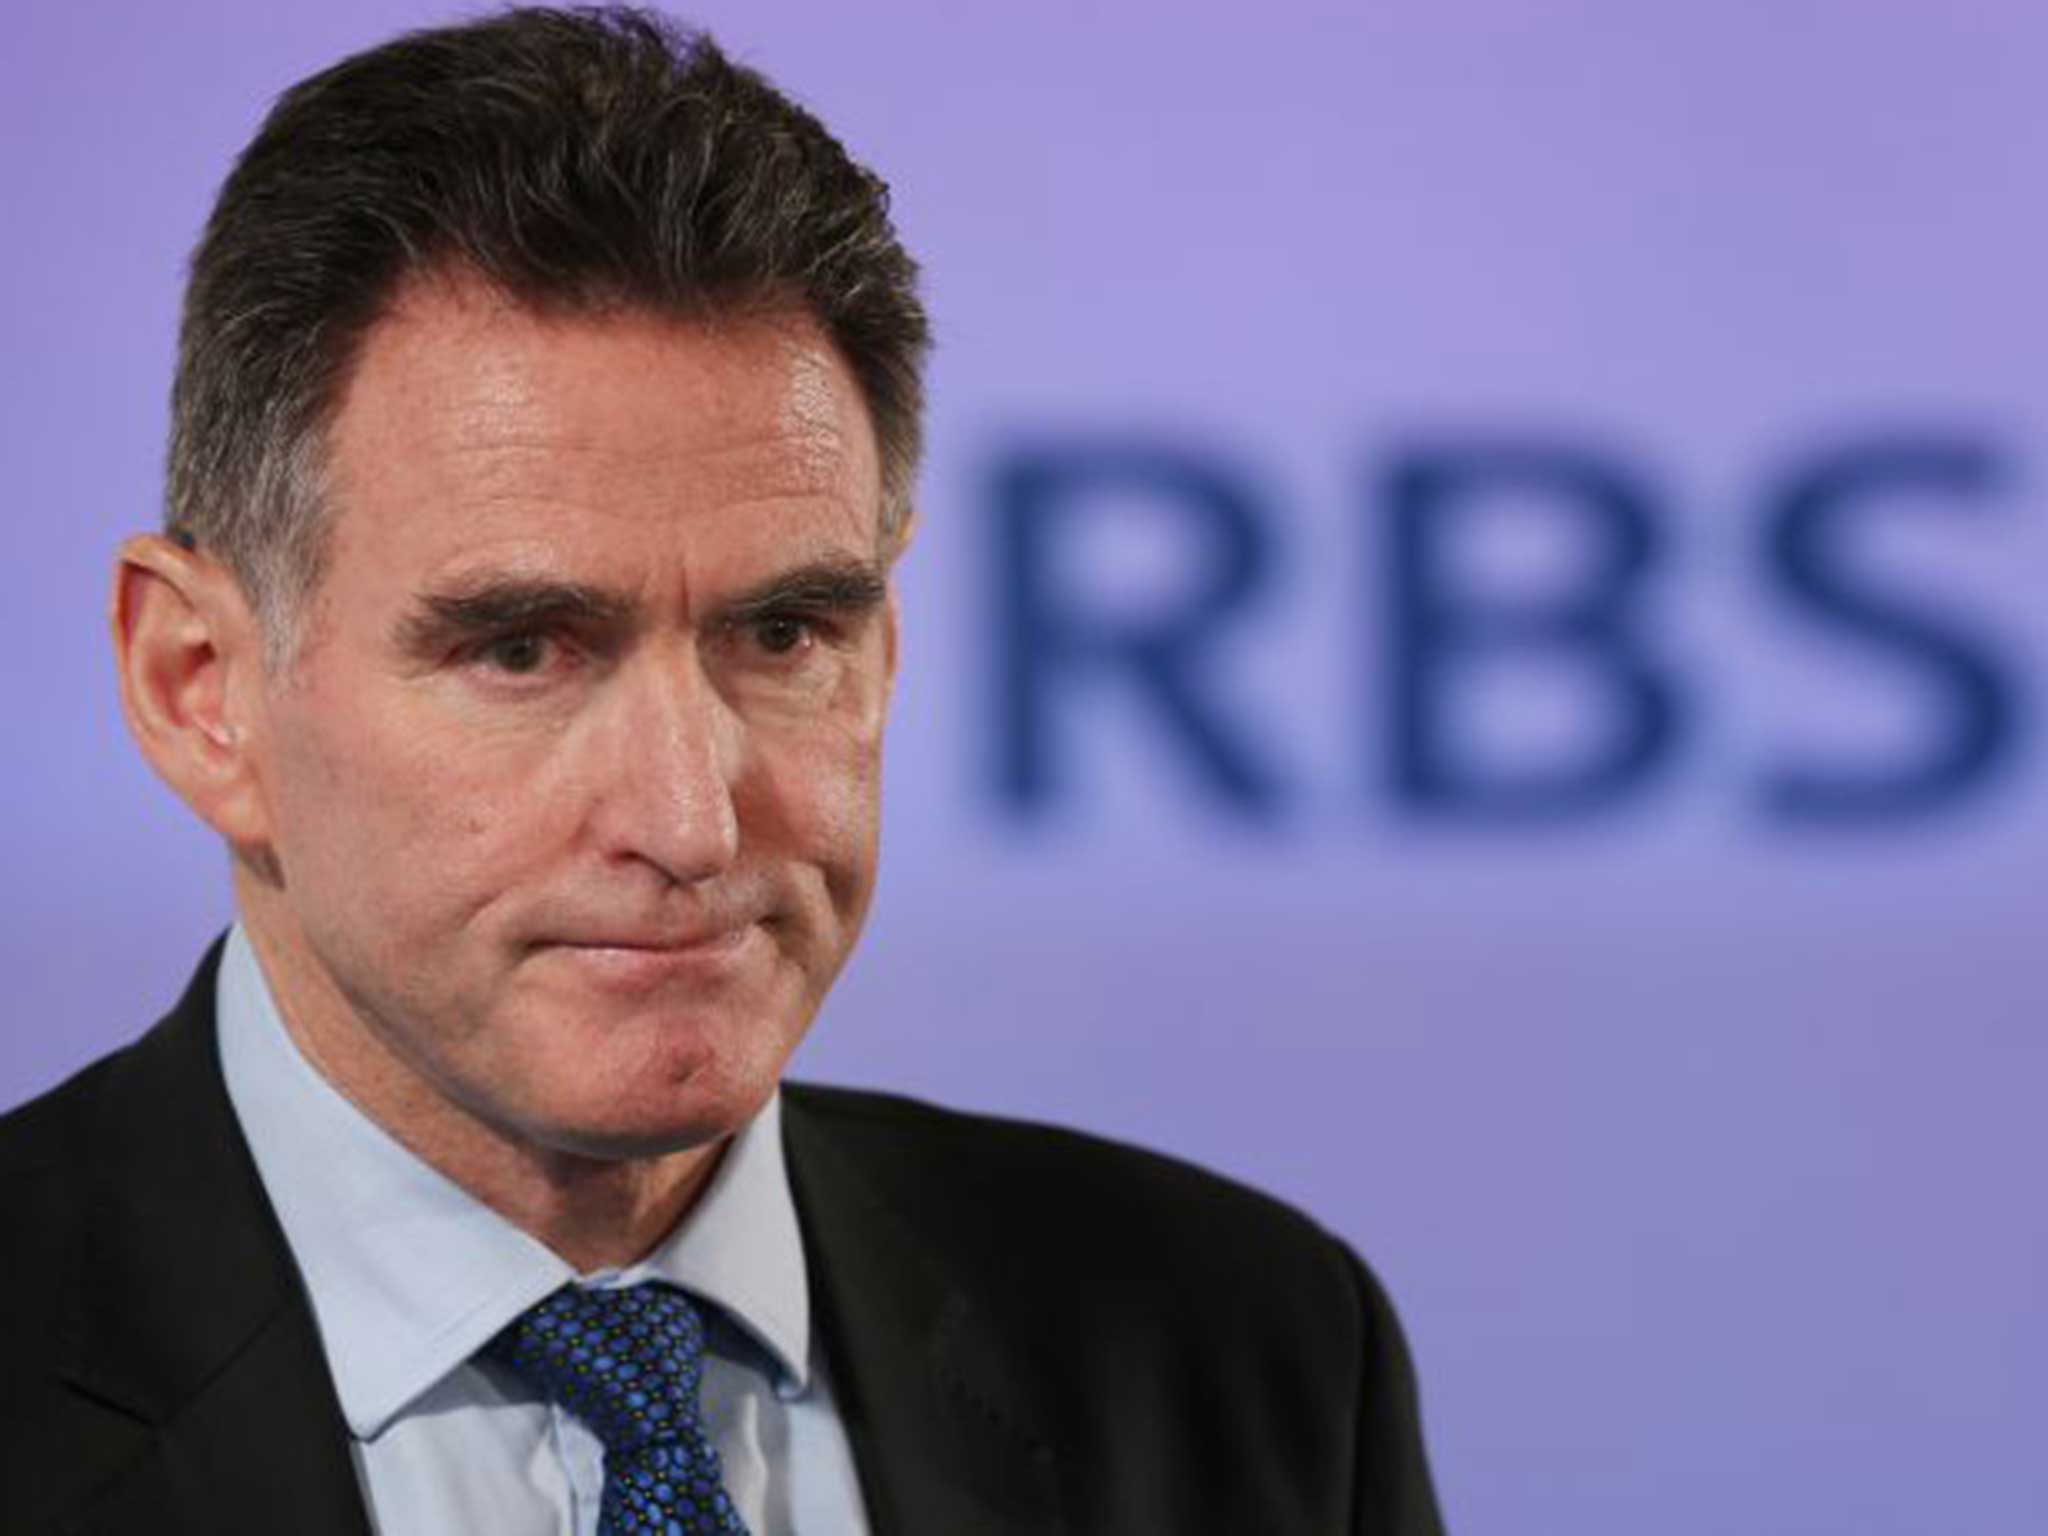 Chief executive Ross McEwan insisted it was not the responsibility of banks if customers gave their account details – or money – to online scammers